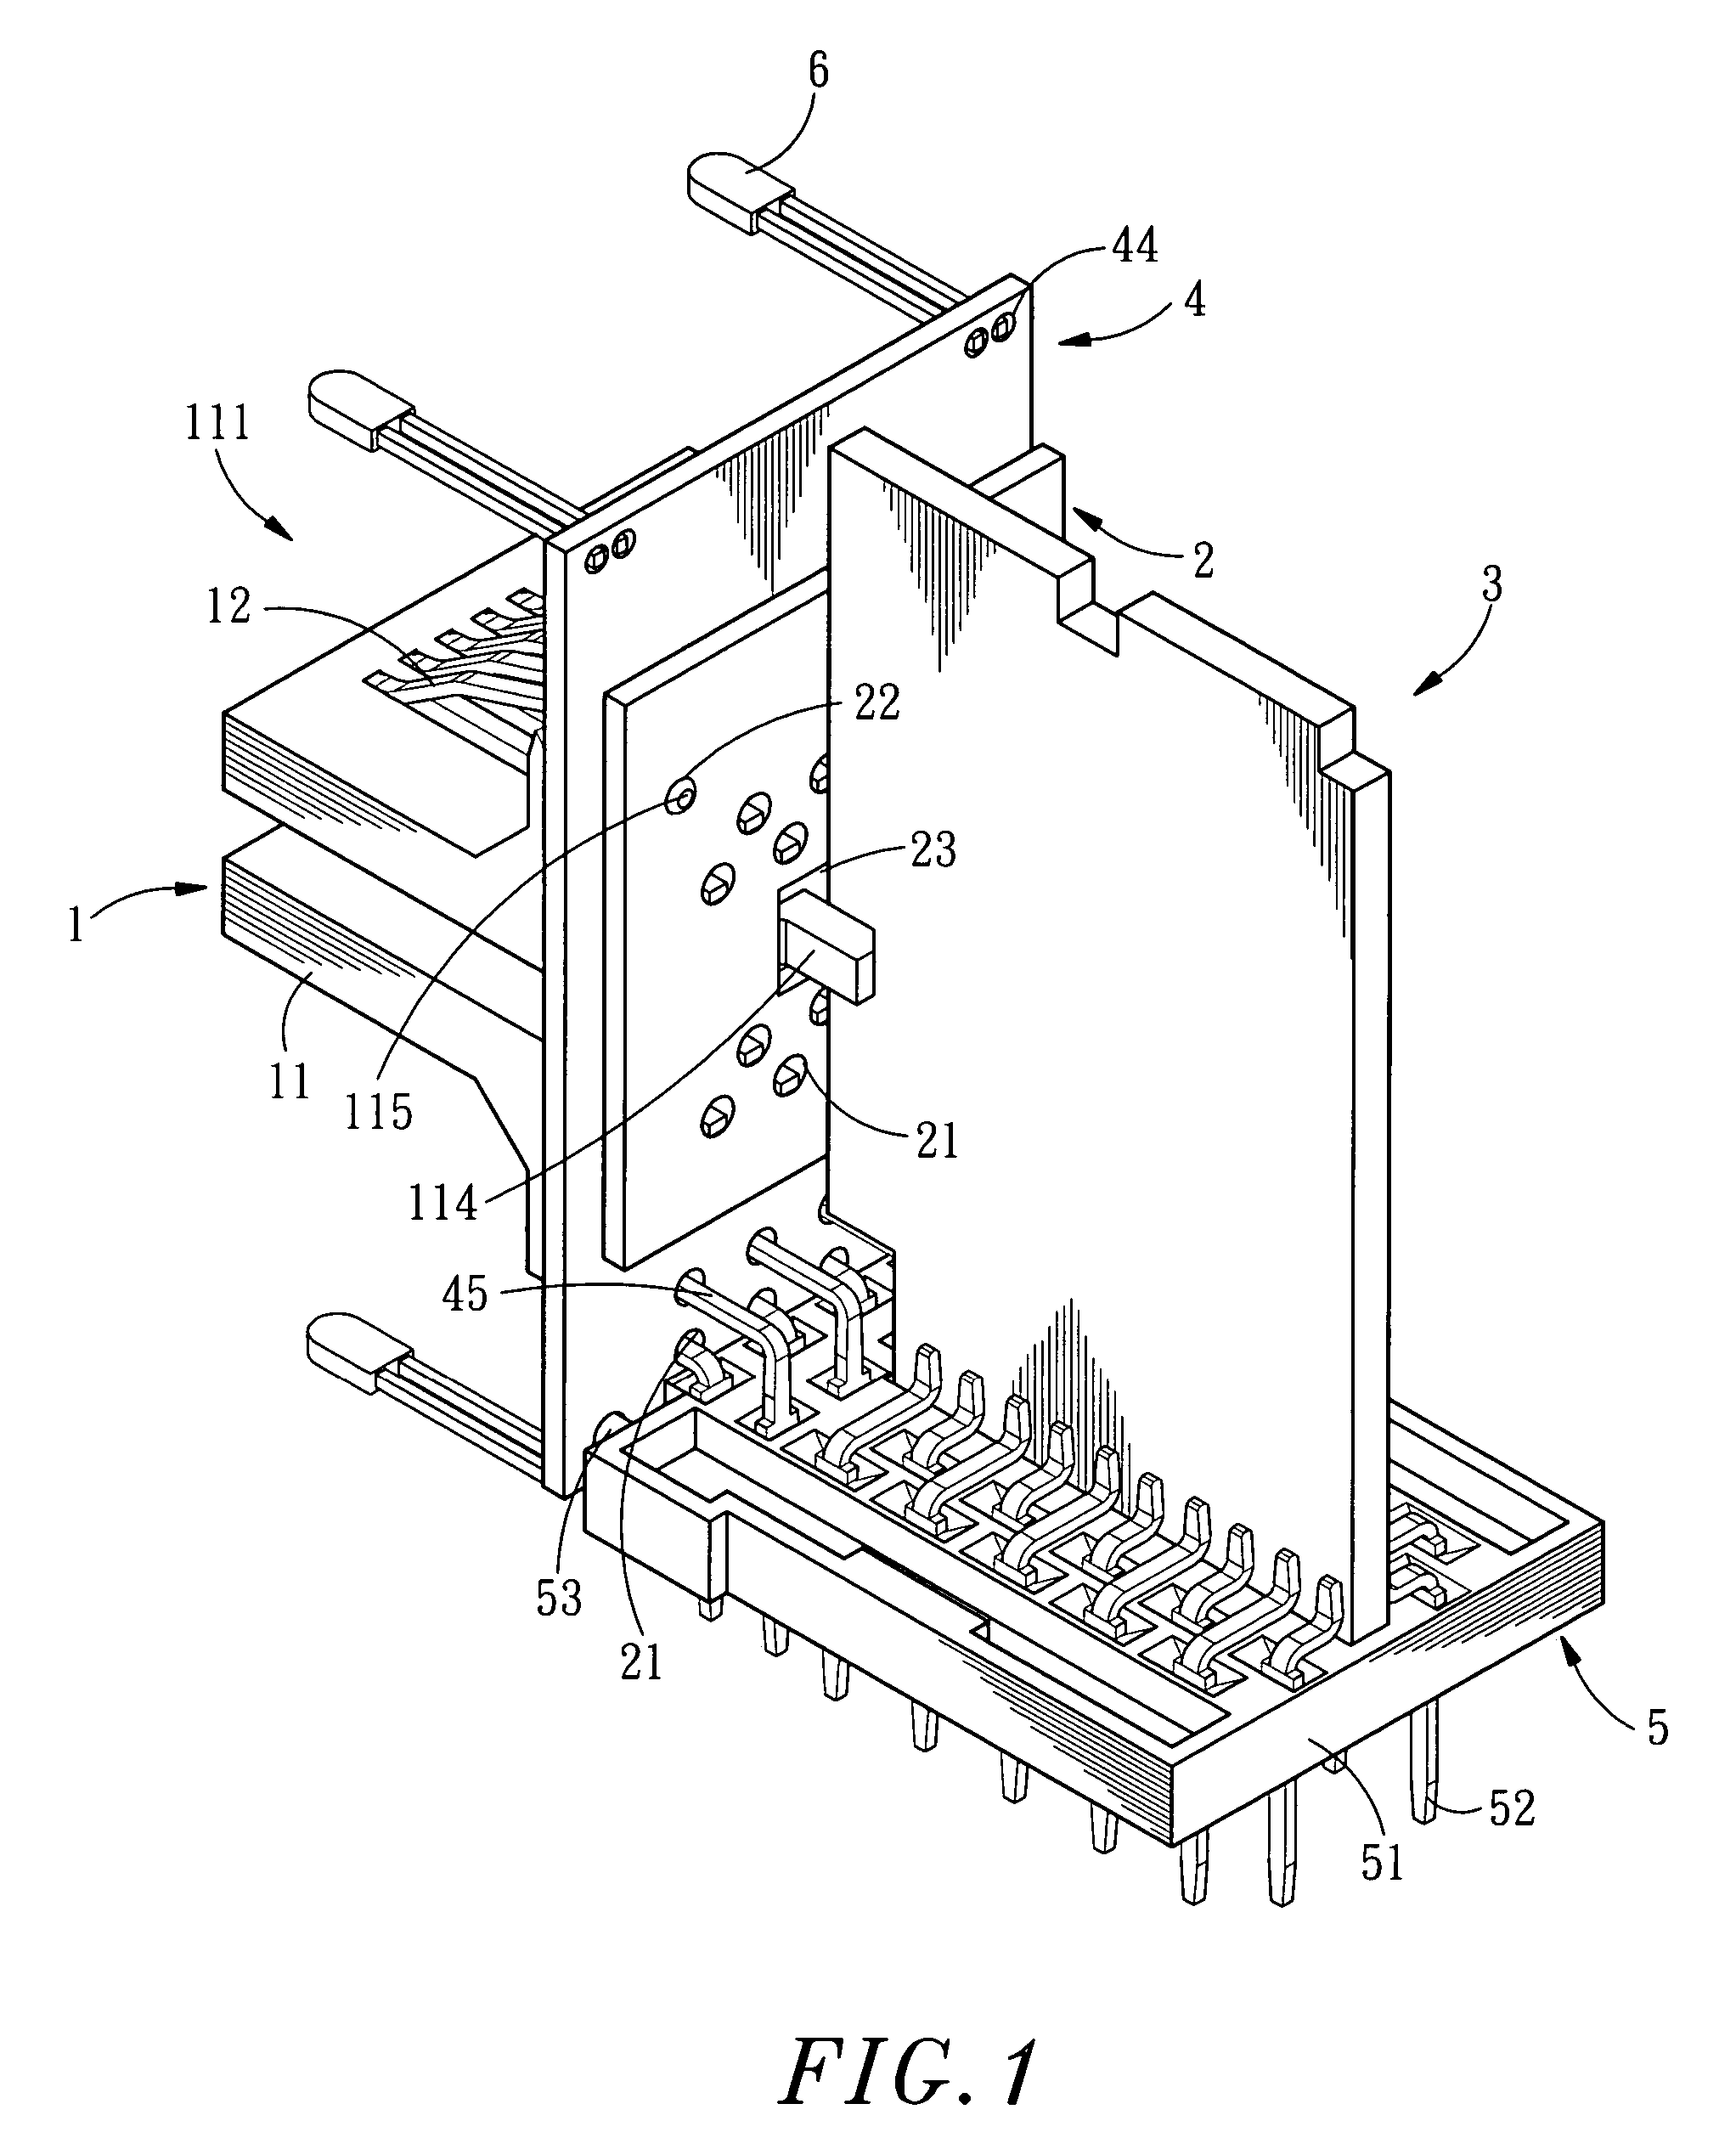 Structure of connector for reducing electro-magnetic wave interference